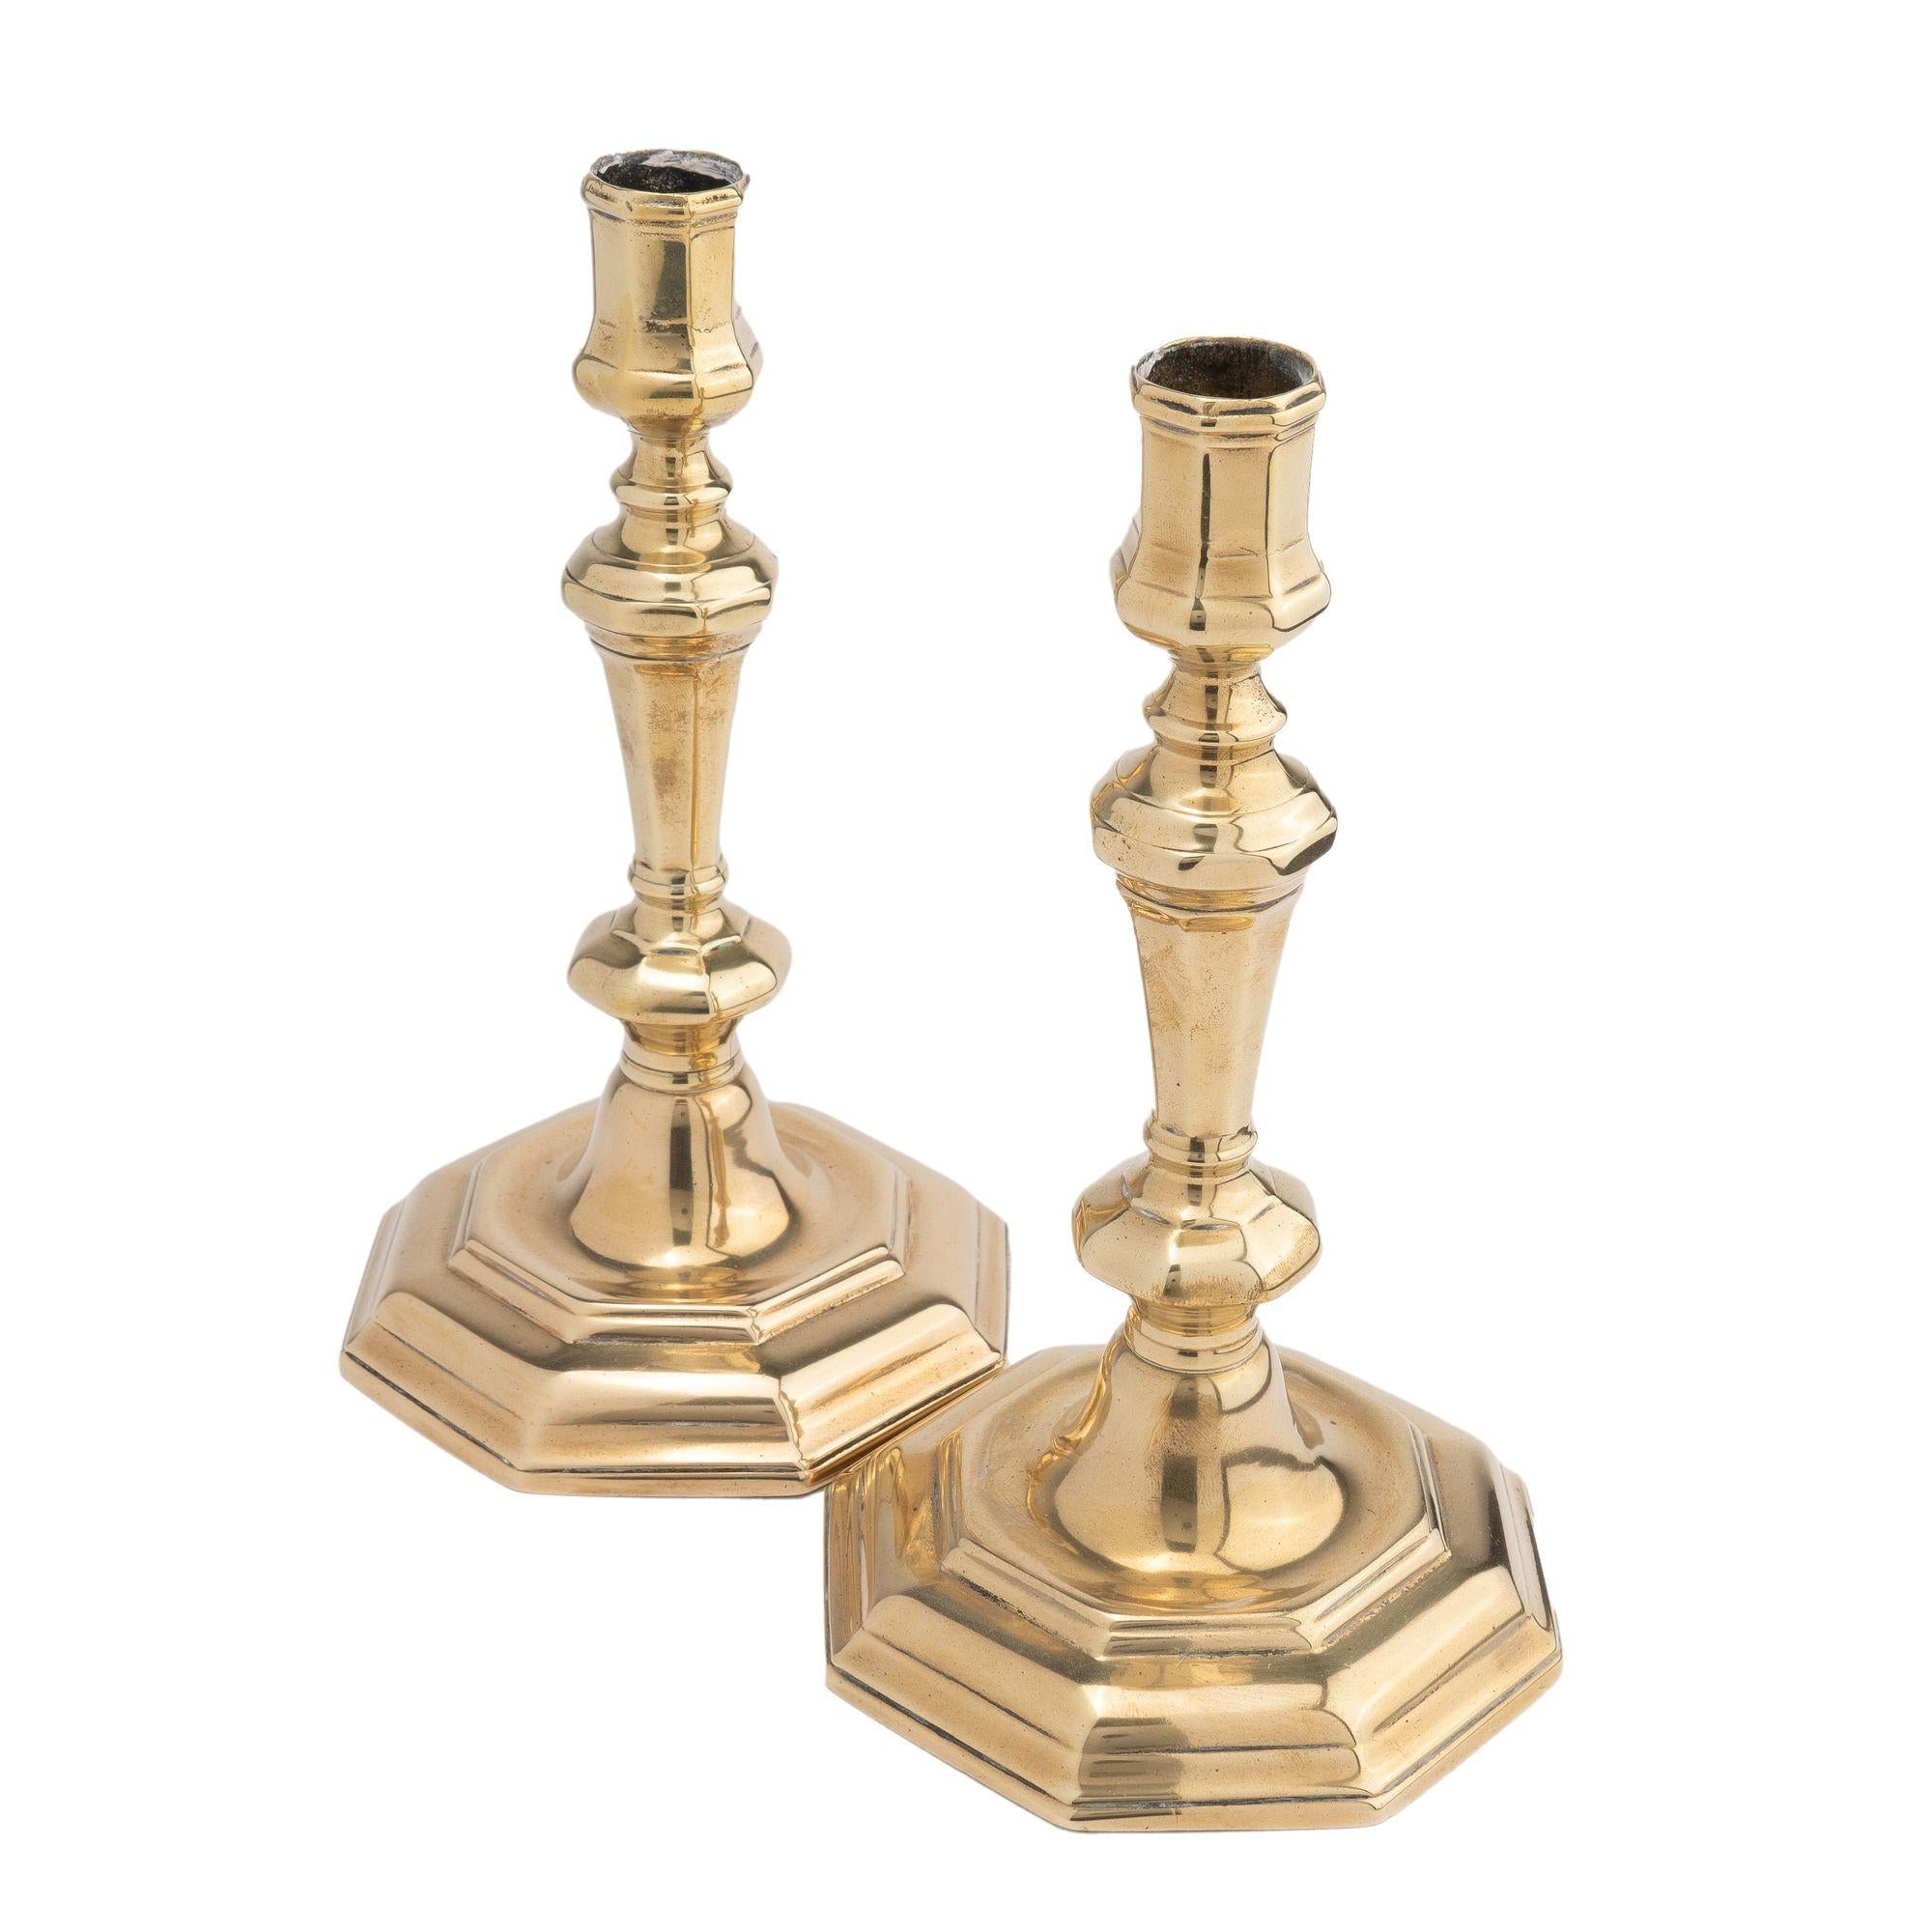 Pair of hollow core cast brass candlesticks with an octagonal urn form candle cup and trumpet form shaft, threaded to a conical dome centered on an hexagonal stepped base.
France, mid 1700's.